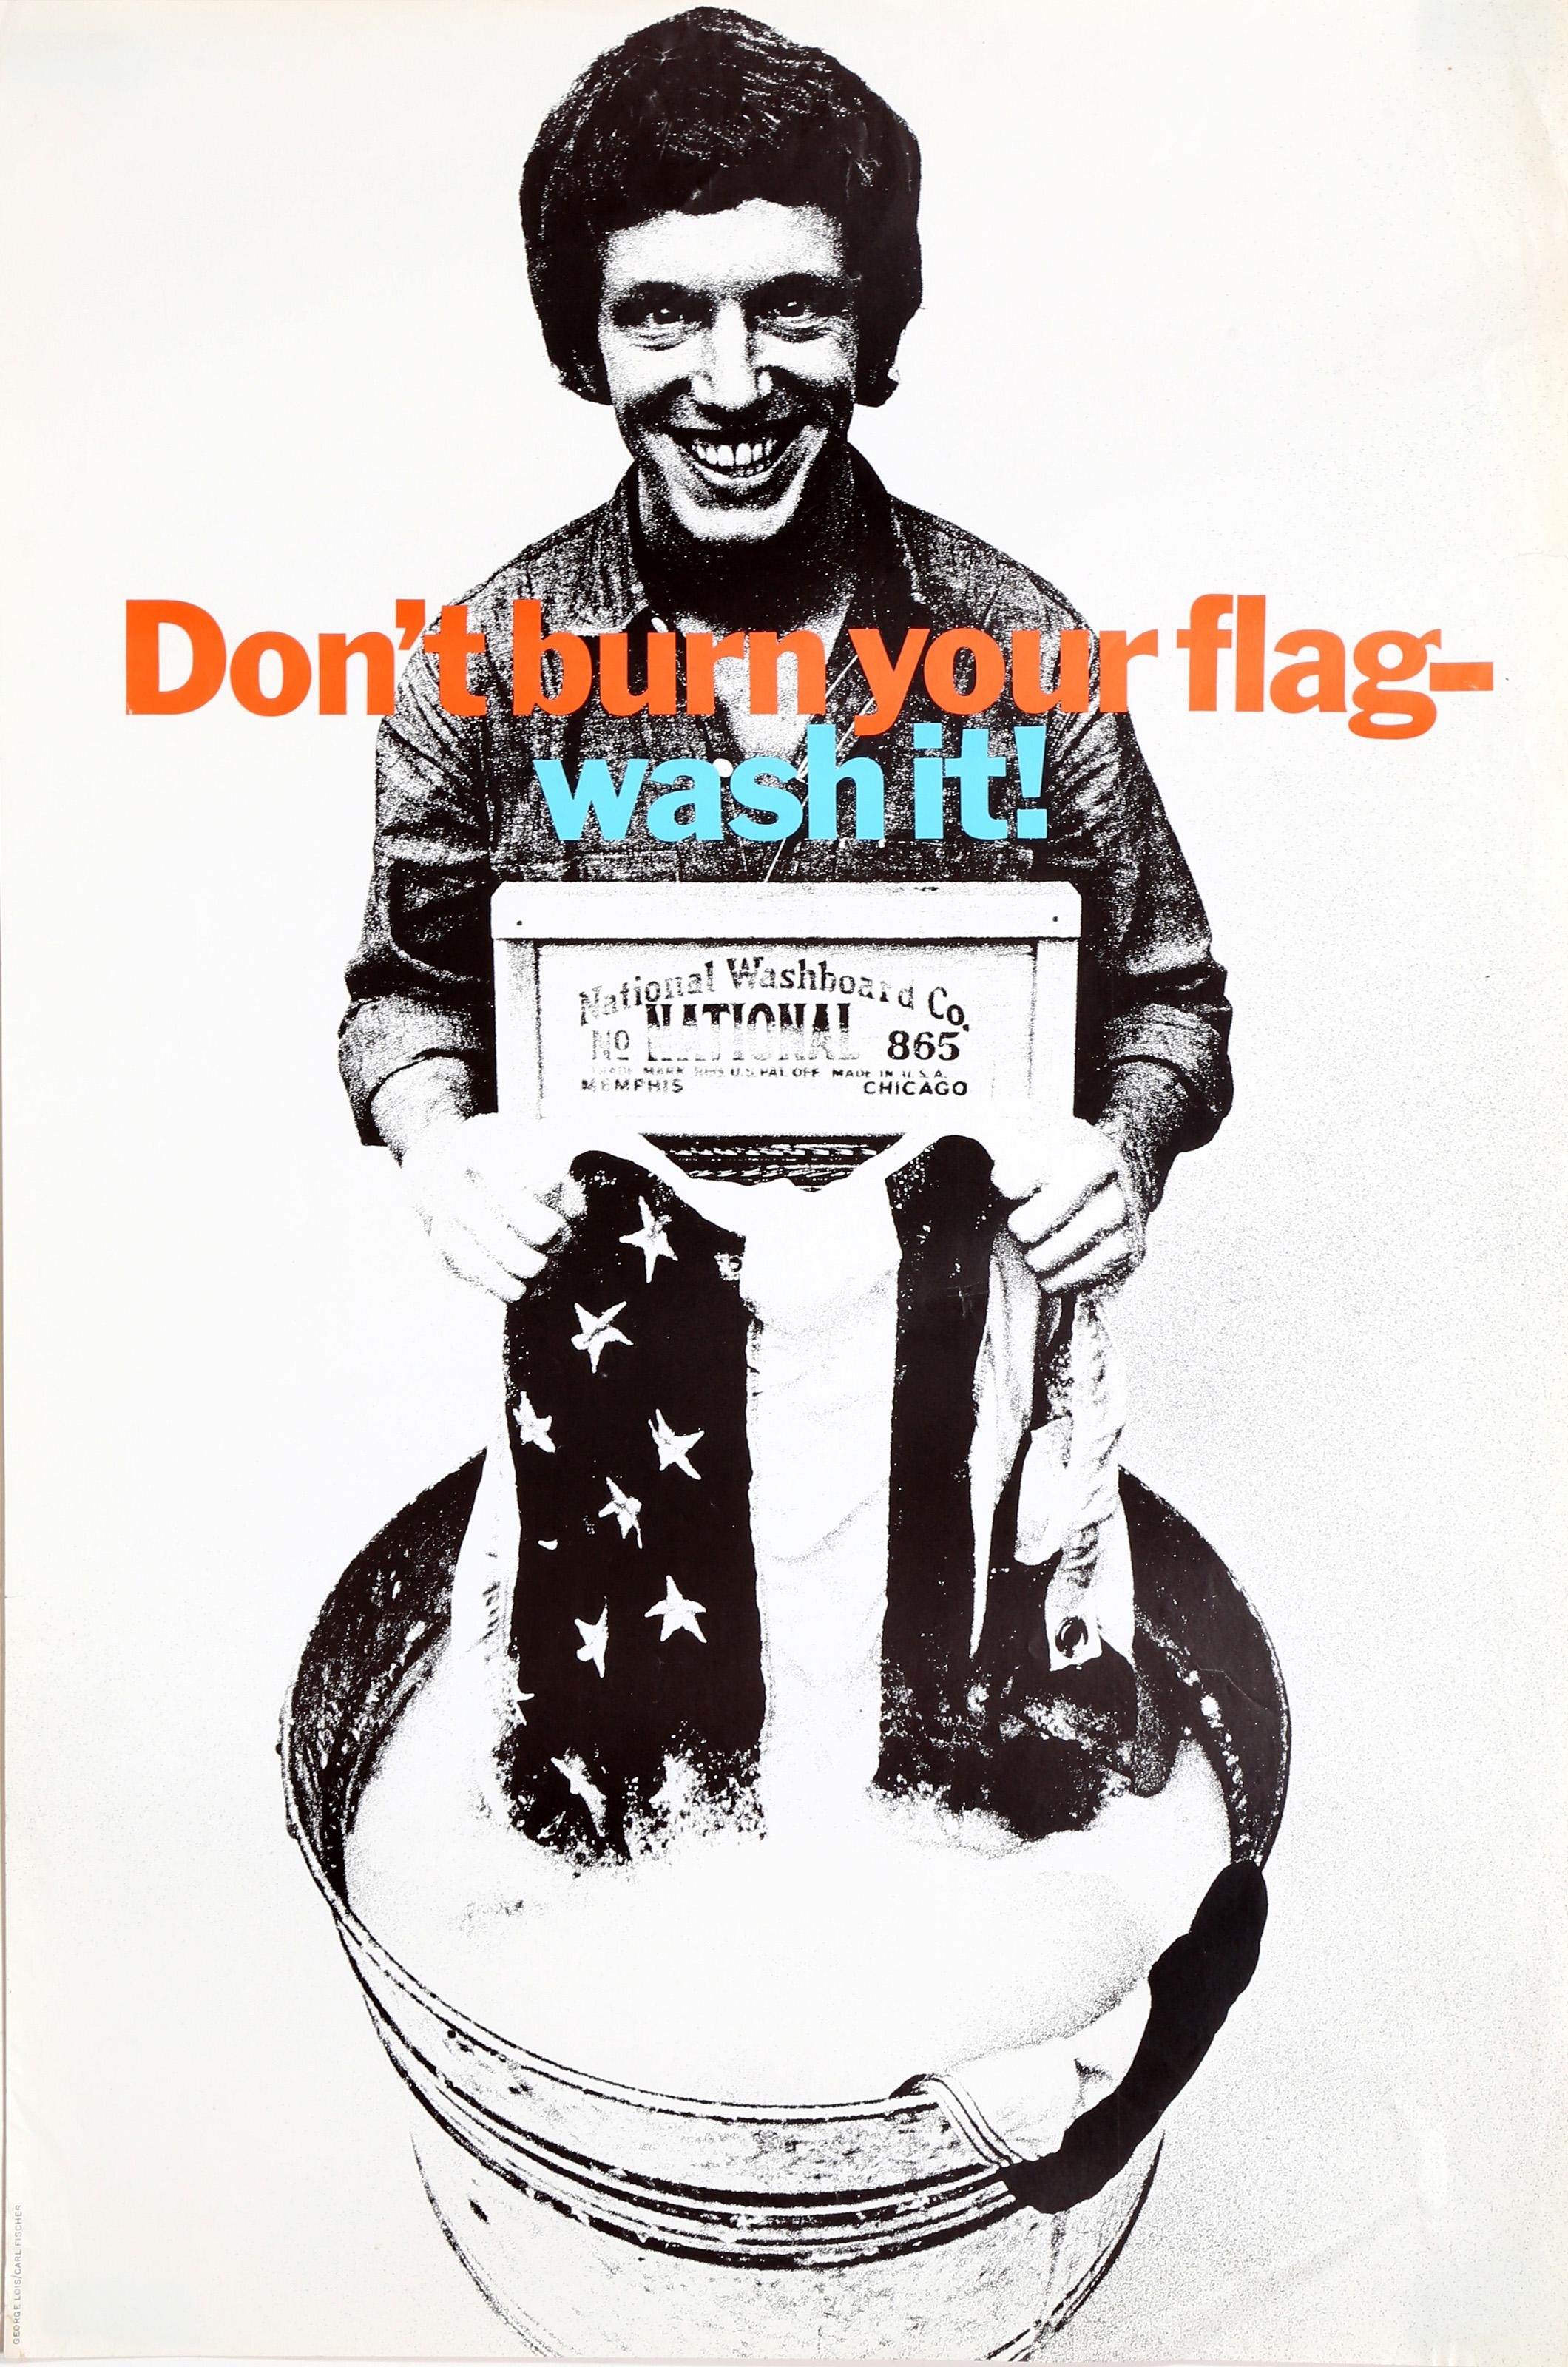 DON'T BURN YOUR FLAG - WASH IT - George Lois